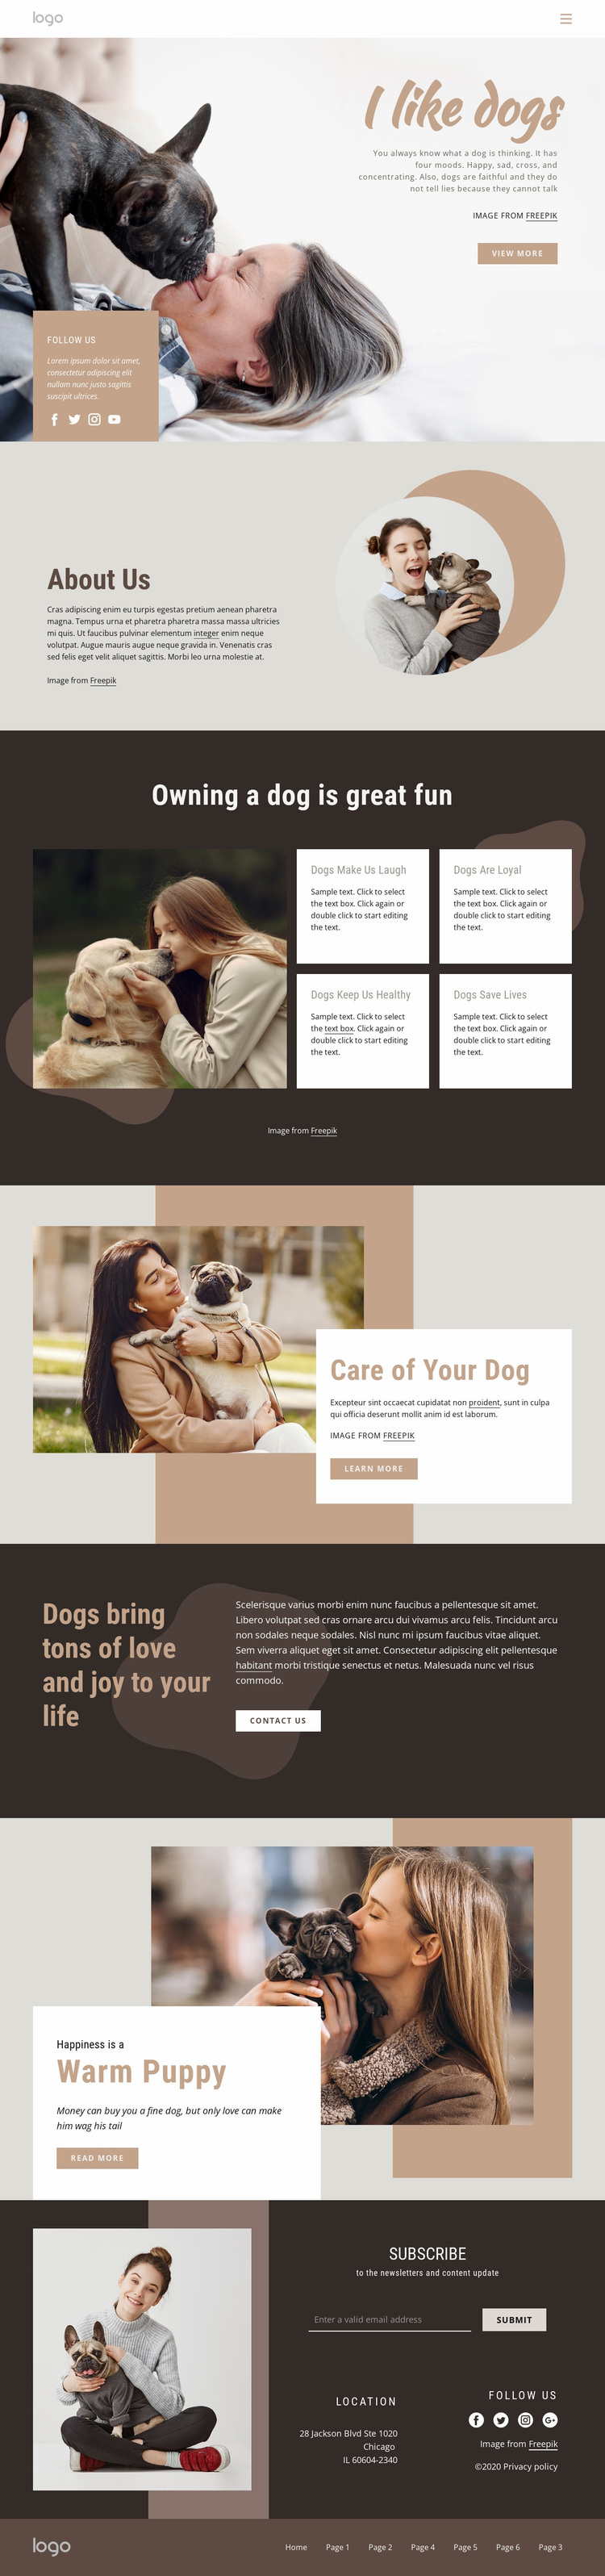 All about dogs Website Design